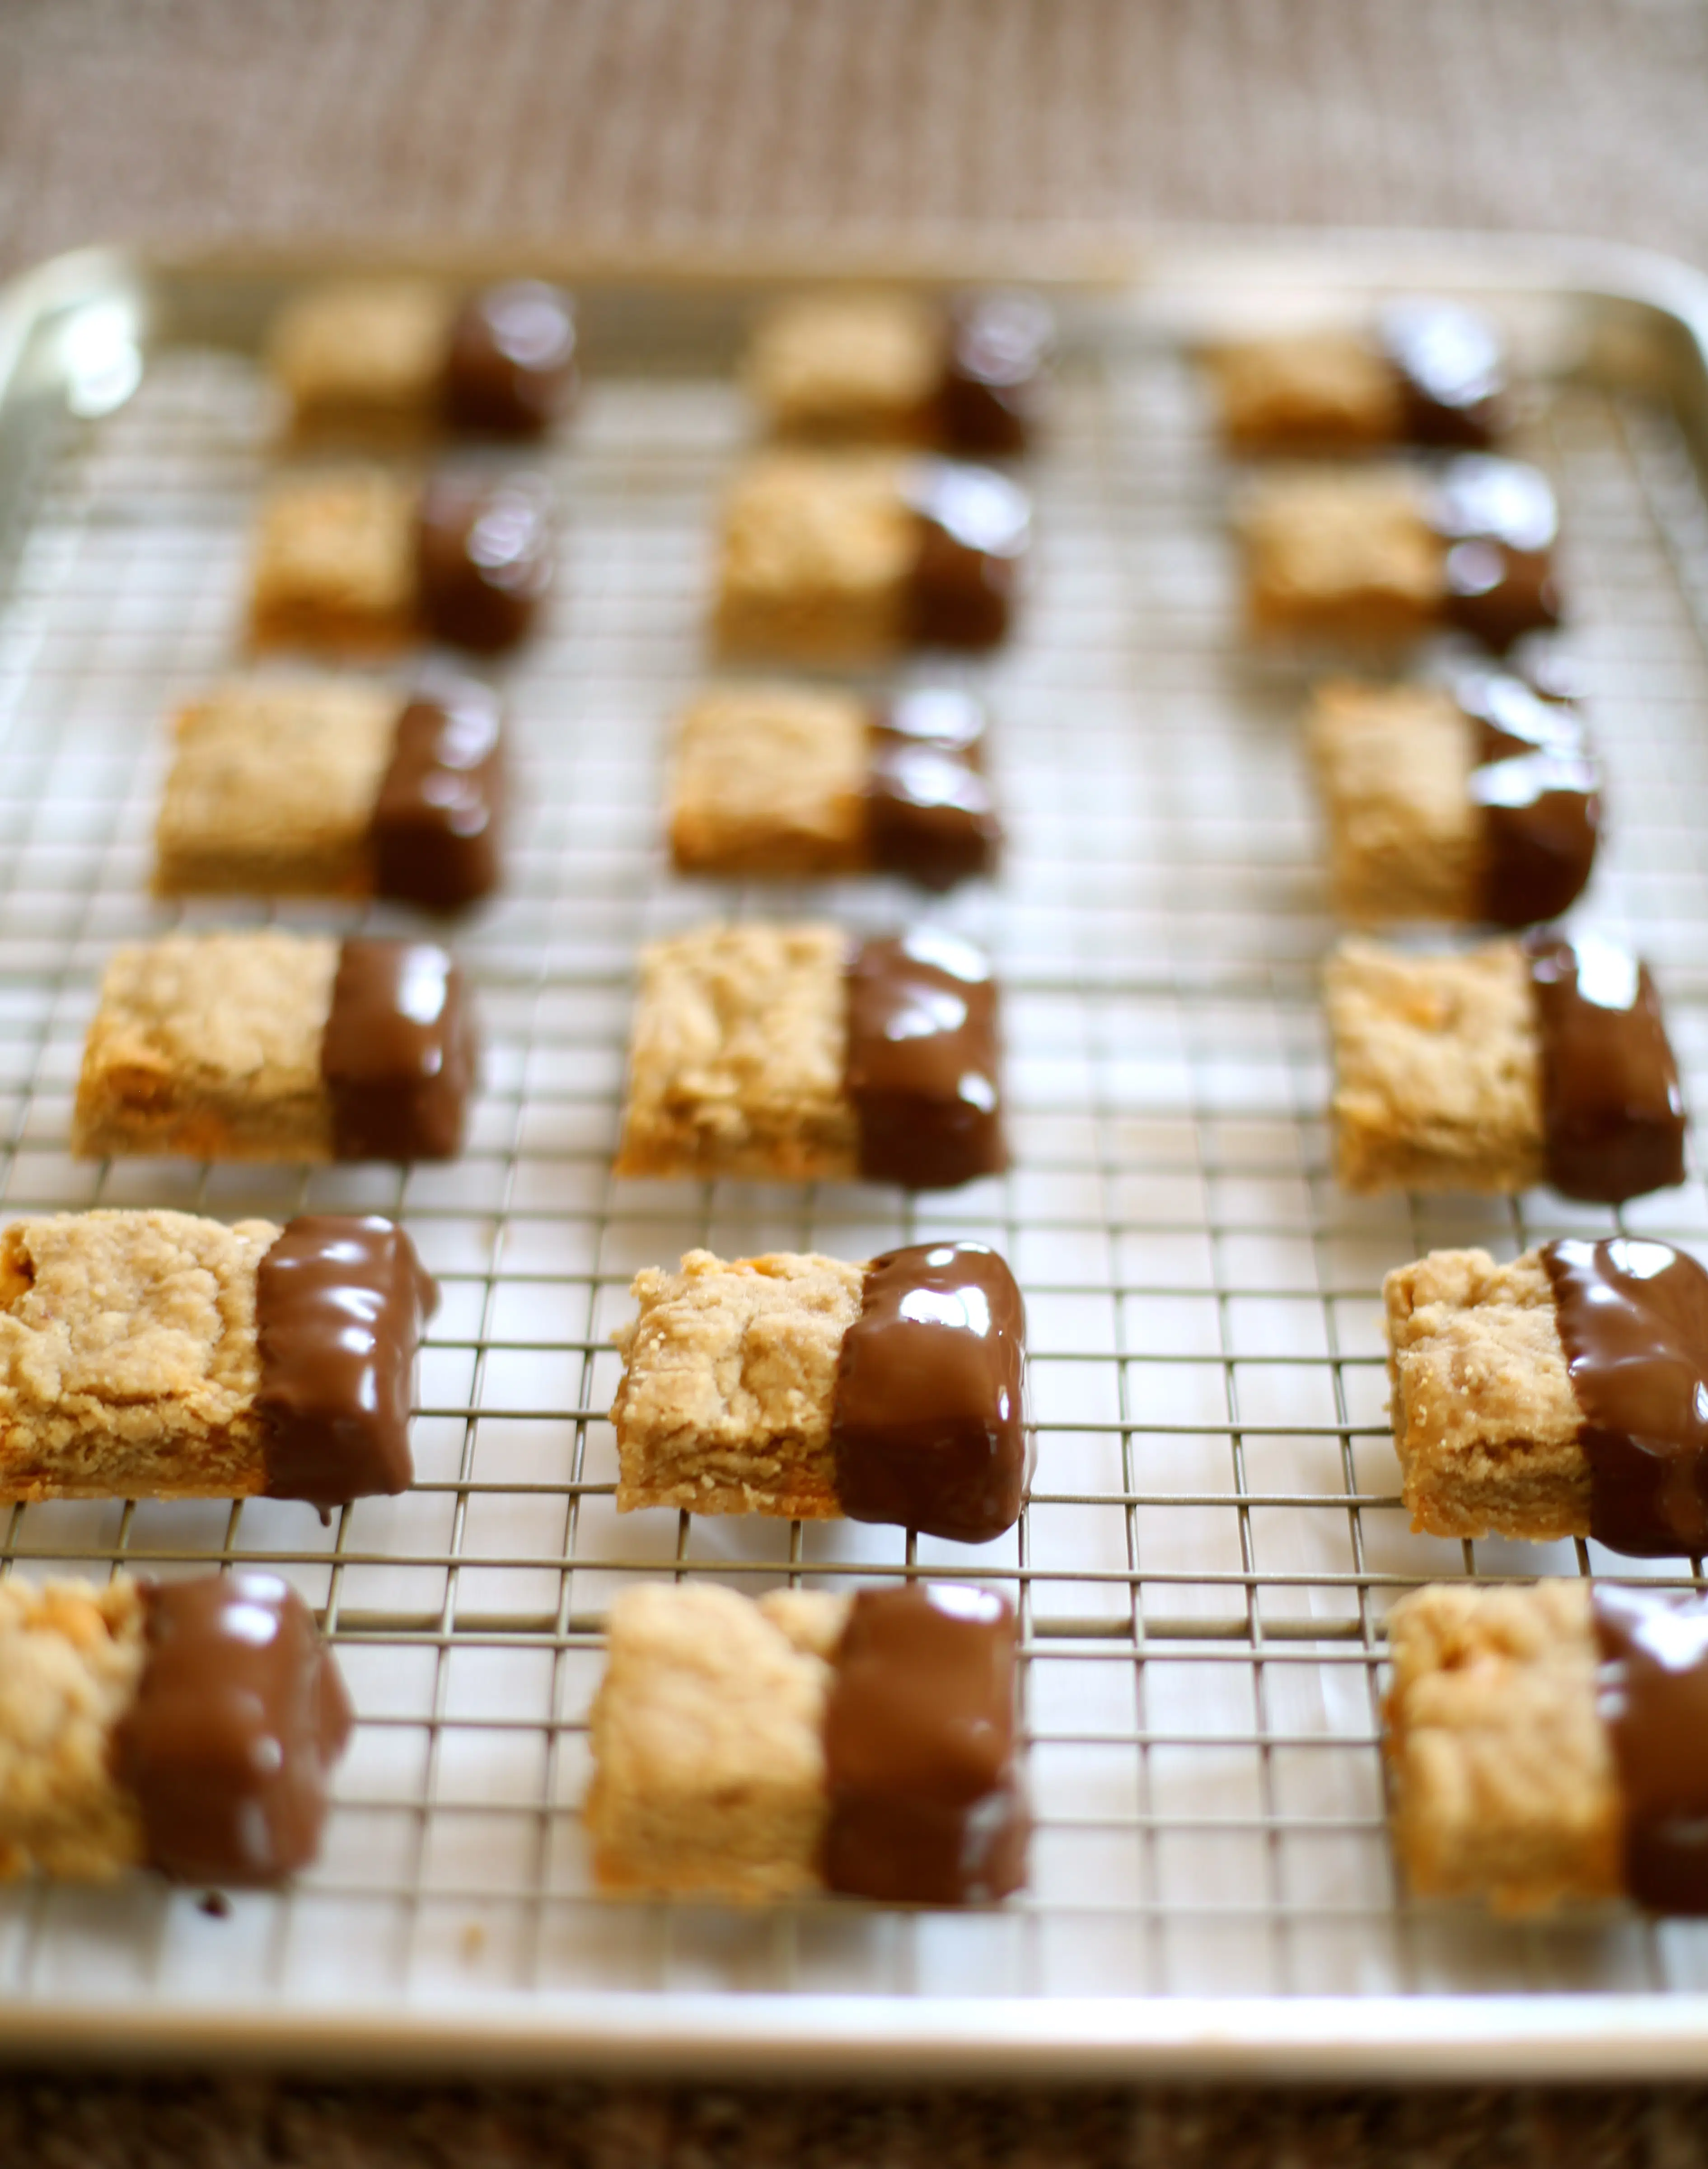  Shortbread cookies dipped in Chocolate on a cooling rack.  